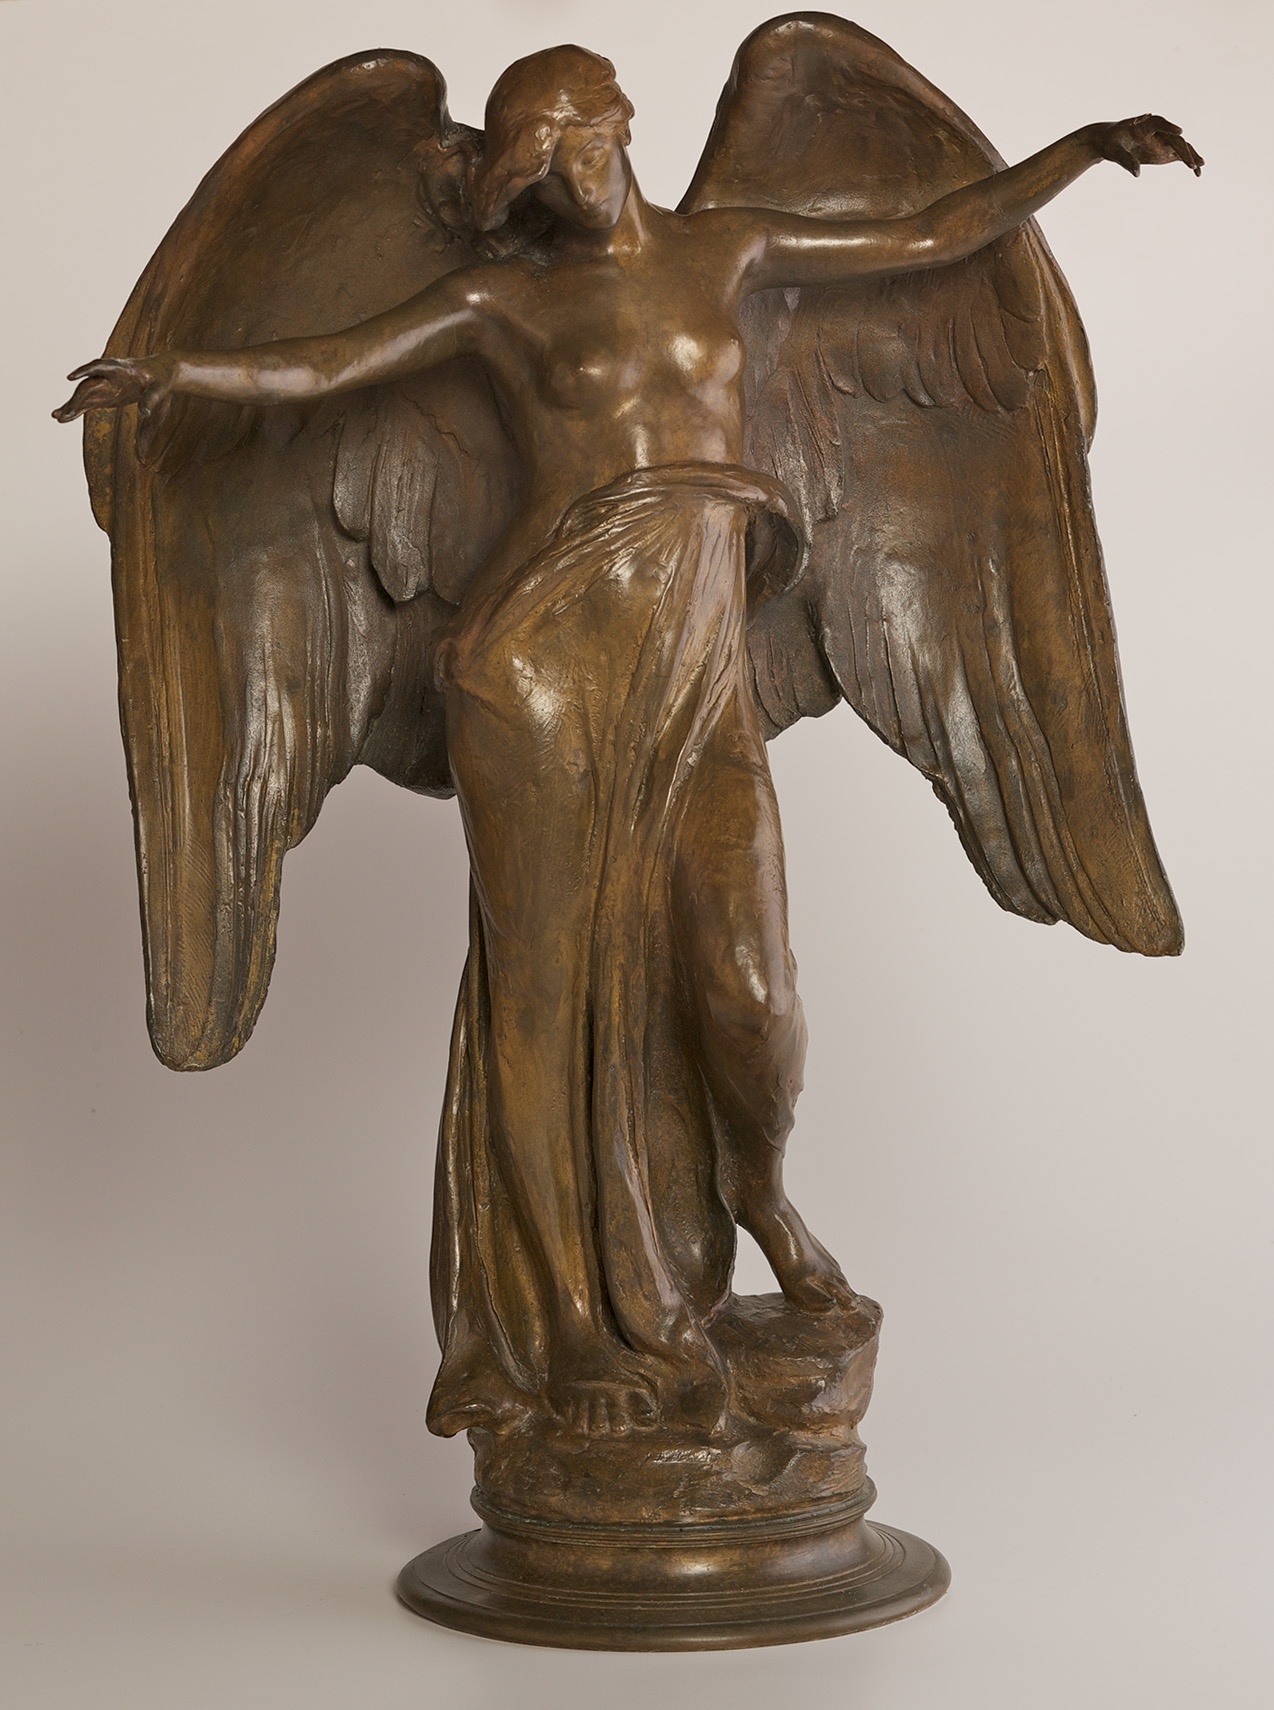 An angel-like figure with large wings holding out her arms to the side.